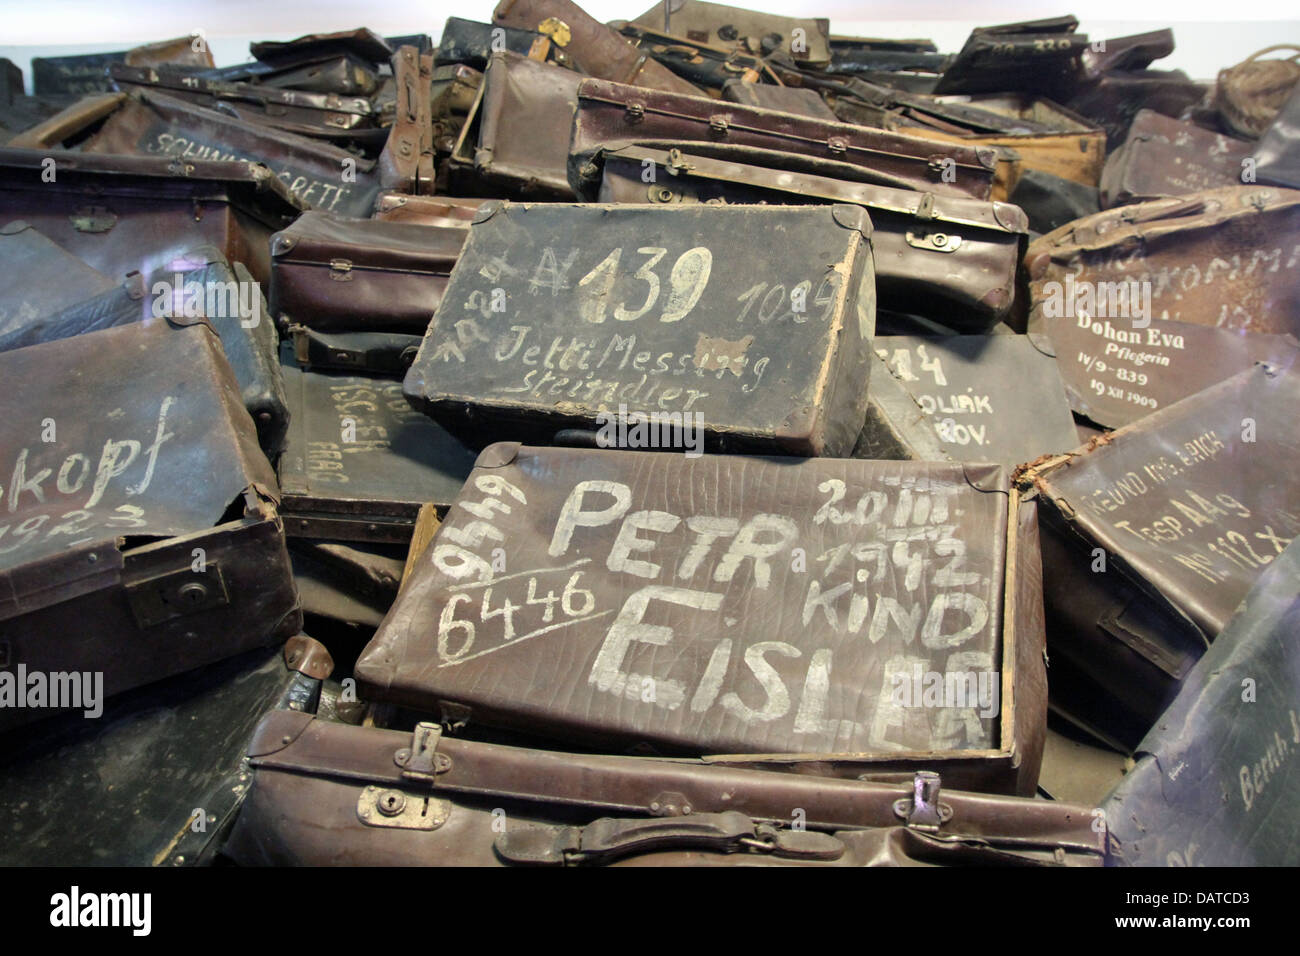 Behind a display glass, suitcases of Jewish victims of the Holocaust at Auschwitz-Birkenau concentration camp near Krakow. Stock Photo